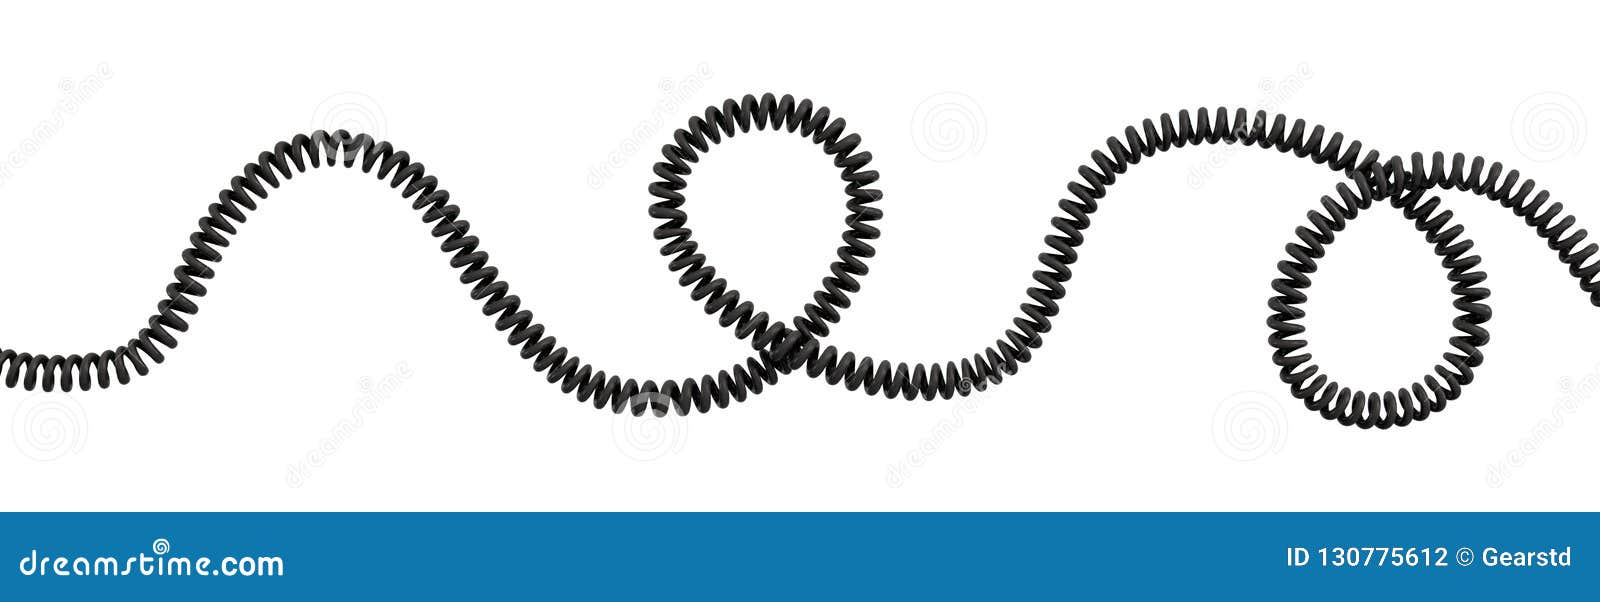 3d rendering of a single curved spiral cable lying on a white background.